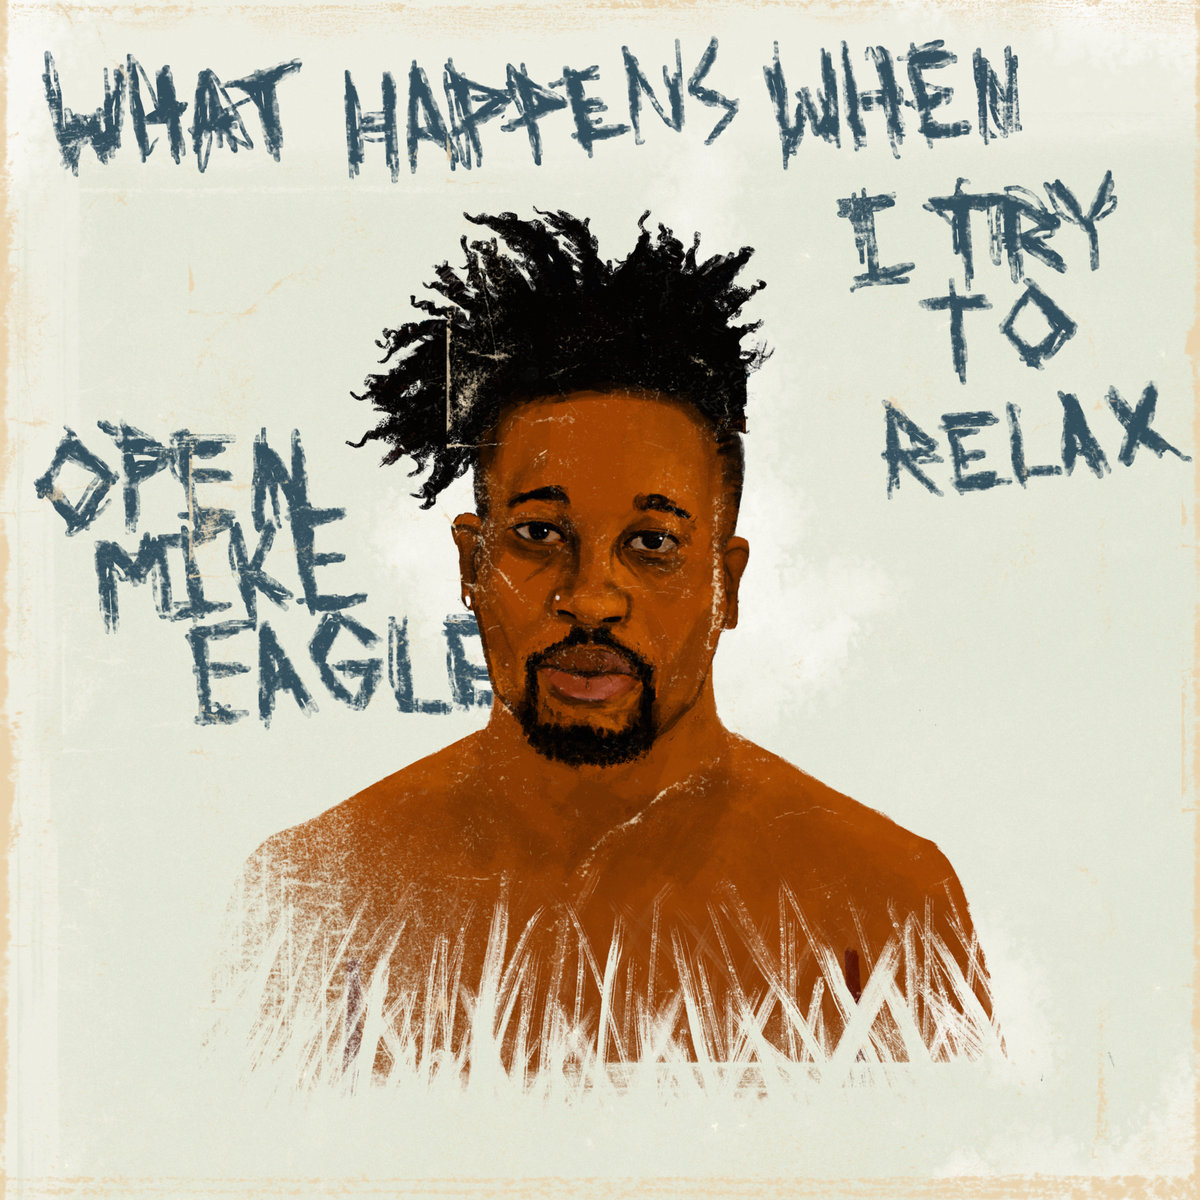 Open Mike Eagle: 'What Happens When I Try To Relax'